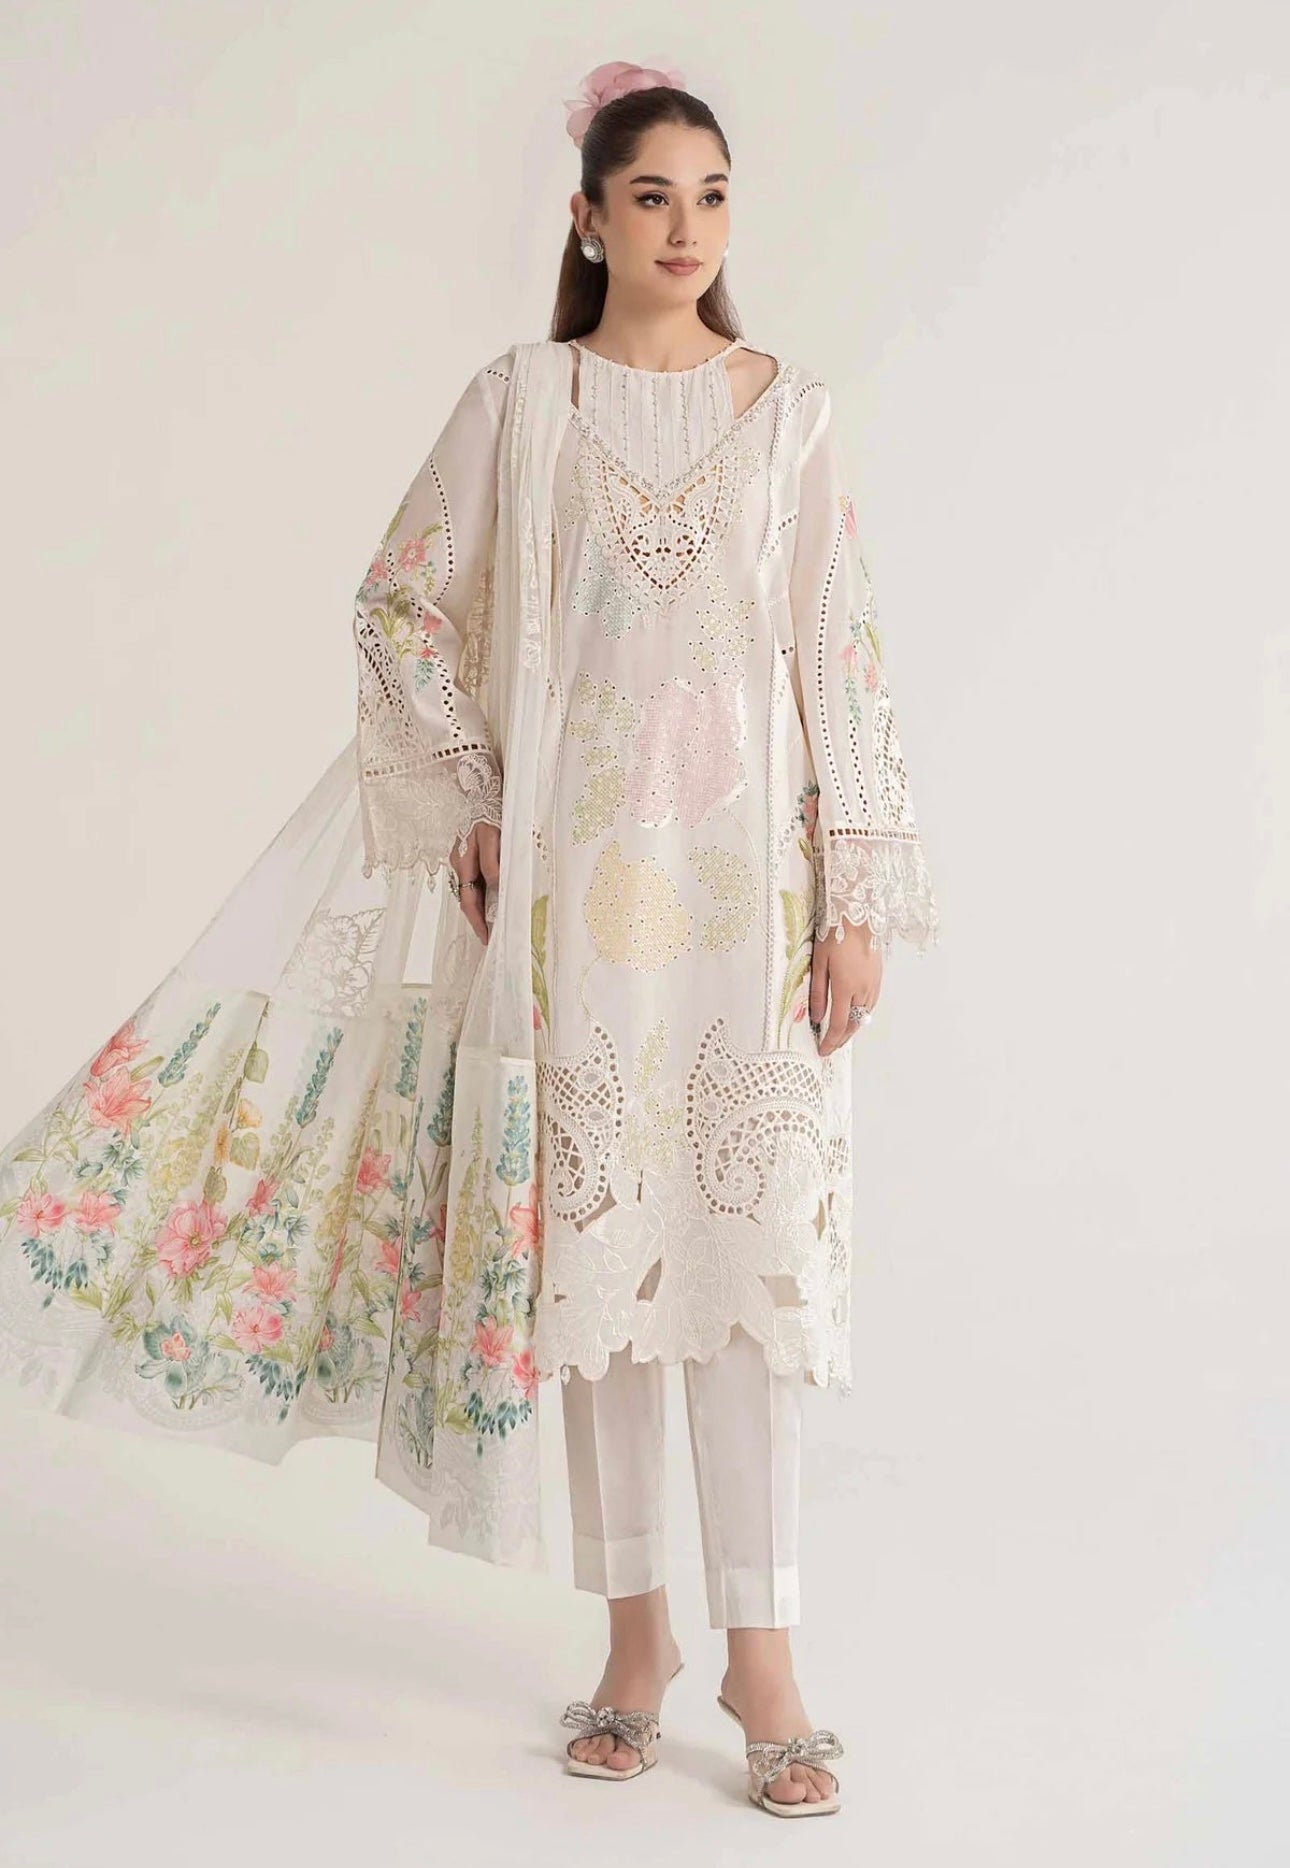 SIMRANS Maria B Inspired Chikan Embroidered Readymade White 3 Piece Outfit With Full Sleeves